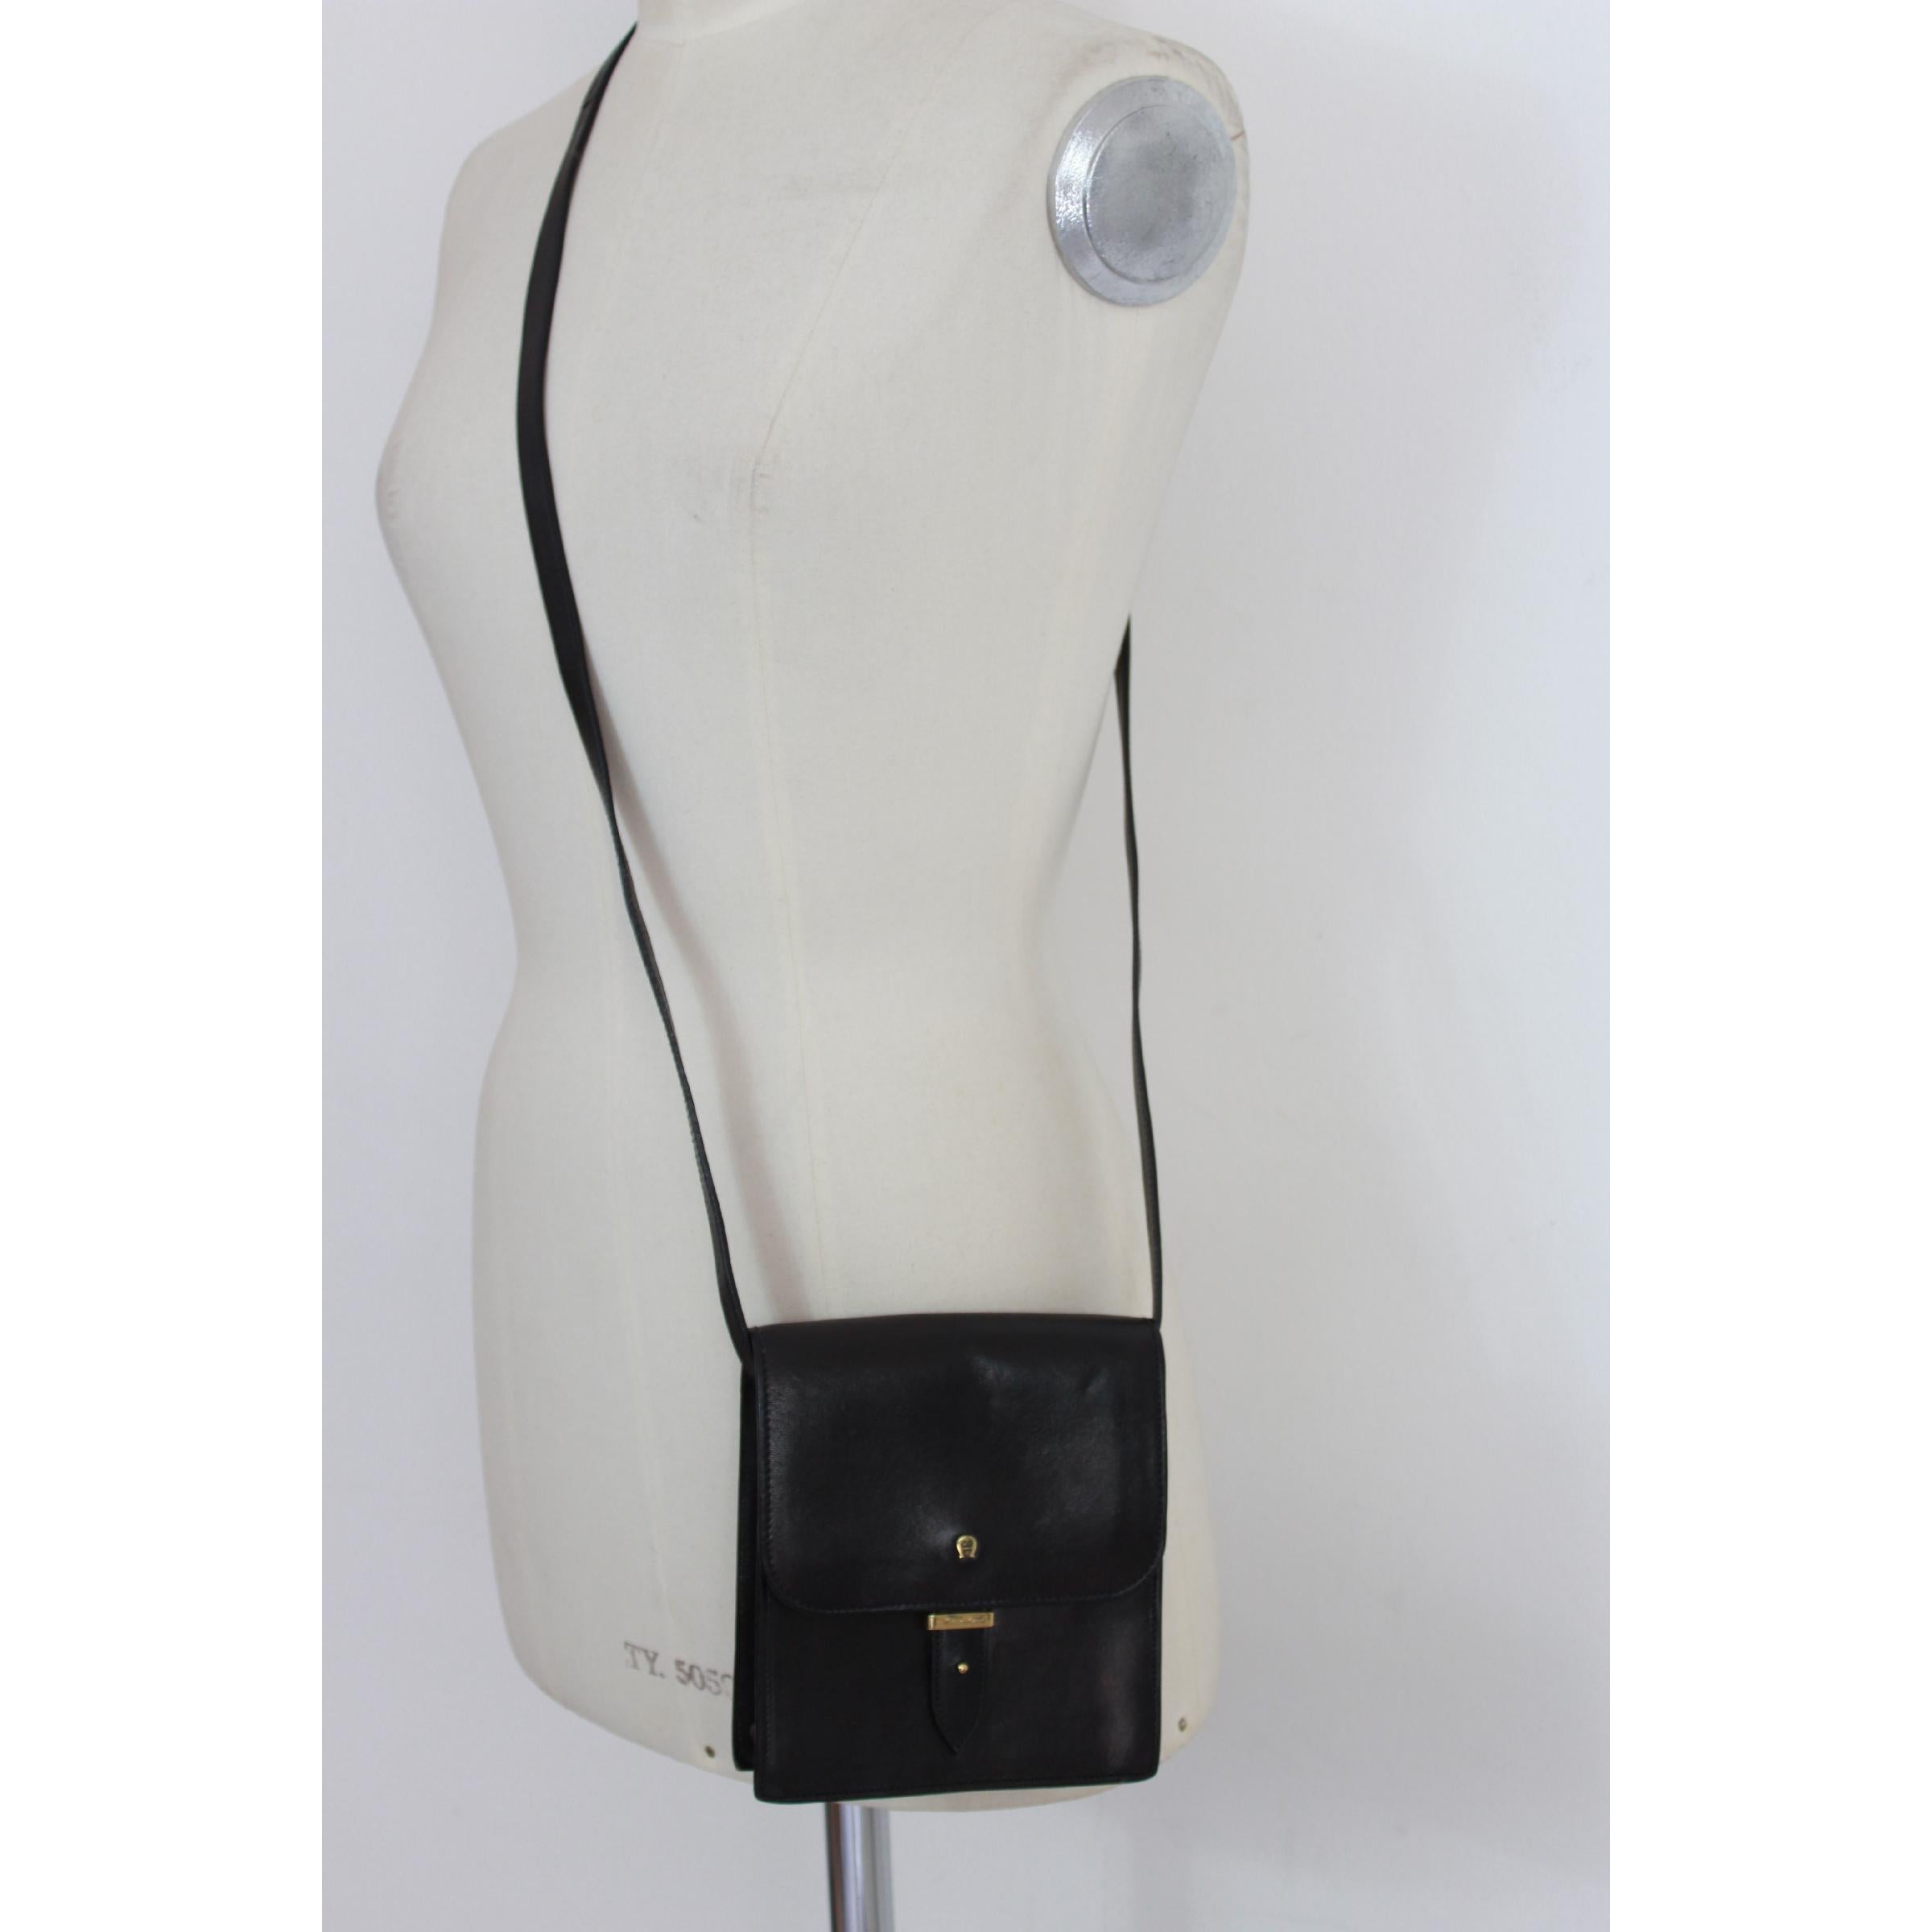 Etienne Aigner vintage 70s shoulder bag. Black, 100% leather. Small model, clip closure, gold details. Made in France. Externally excellent conditions, some signs of use inside.

Height: 16 cm
Width: 15 cm
Depth: 4 cm
